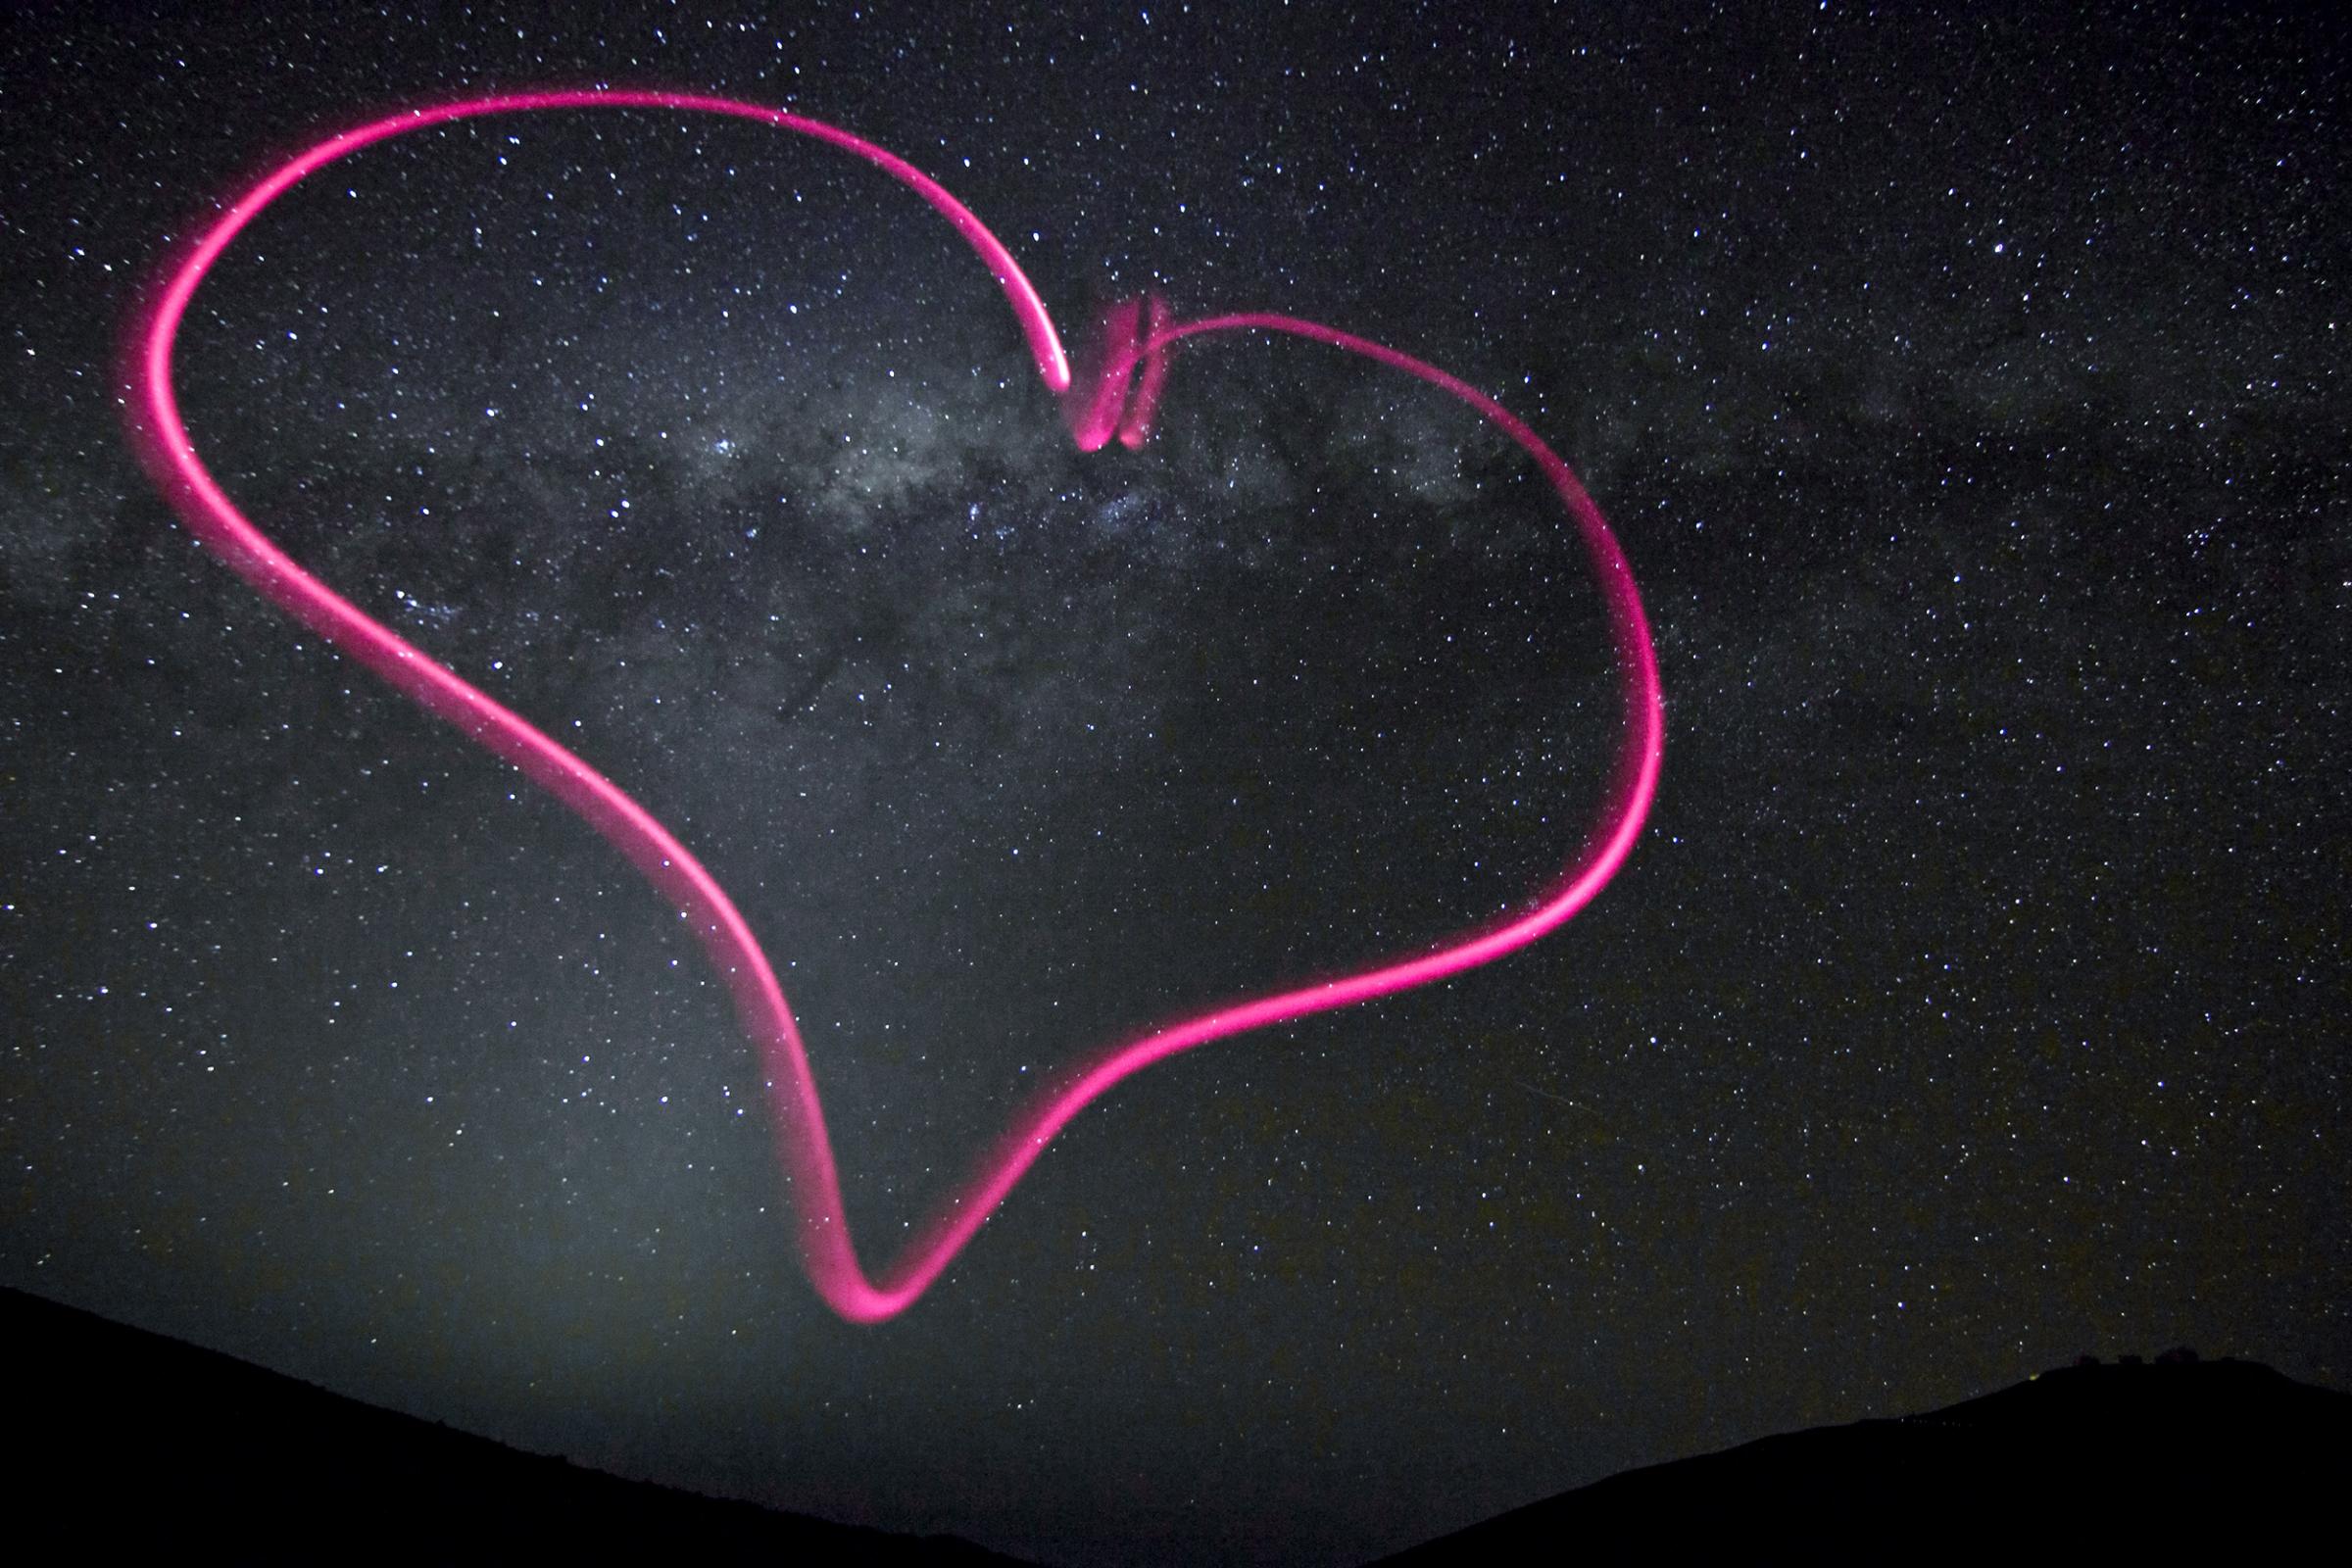 A bright pink symbol of love appears against the backdrop of the night sky over ESO's Paranal Observatory in northern Chile, released on Feb.13, 2012. Julien Girard drew the heart in the air by shining a tiny flashlight keychain at the camera during a 25-second exposure with a tripod. The central region of the Milky Way appears in the middle of the heart, as the plane of our galaxy stretches across the image.